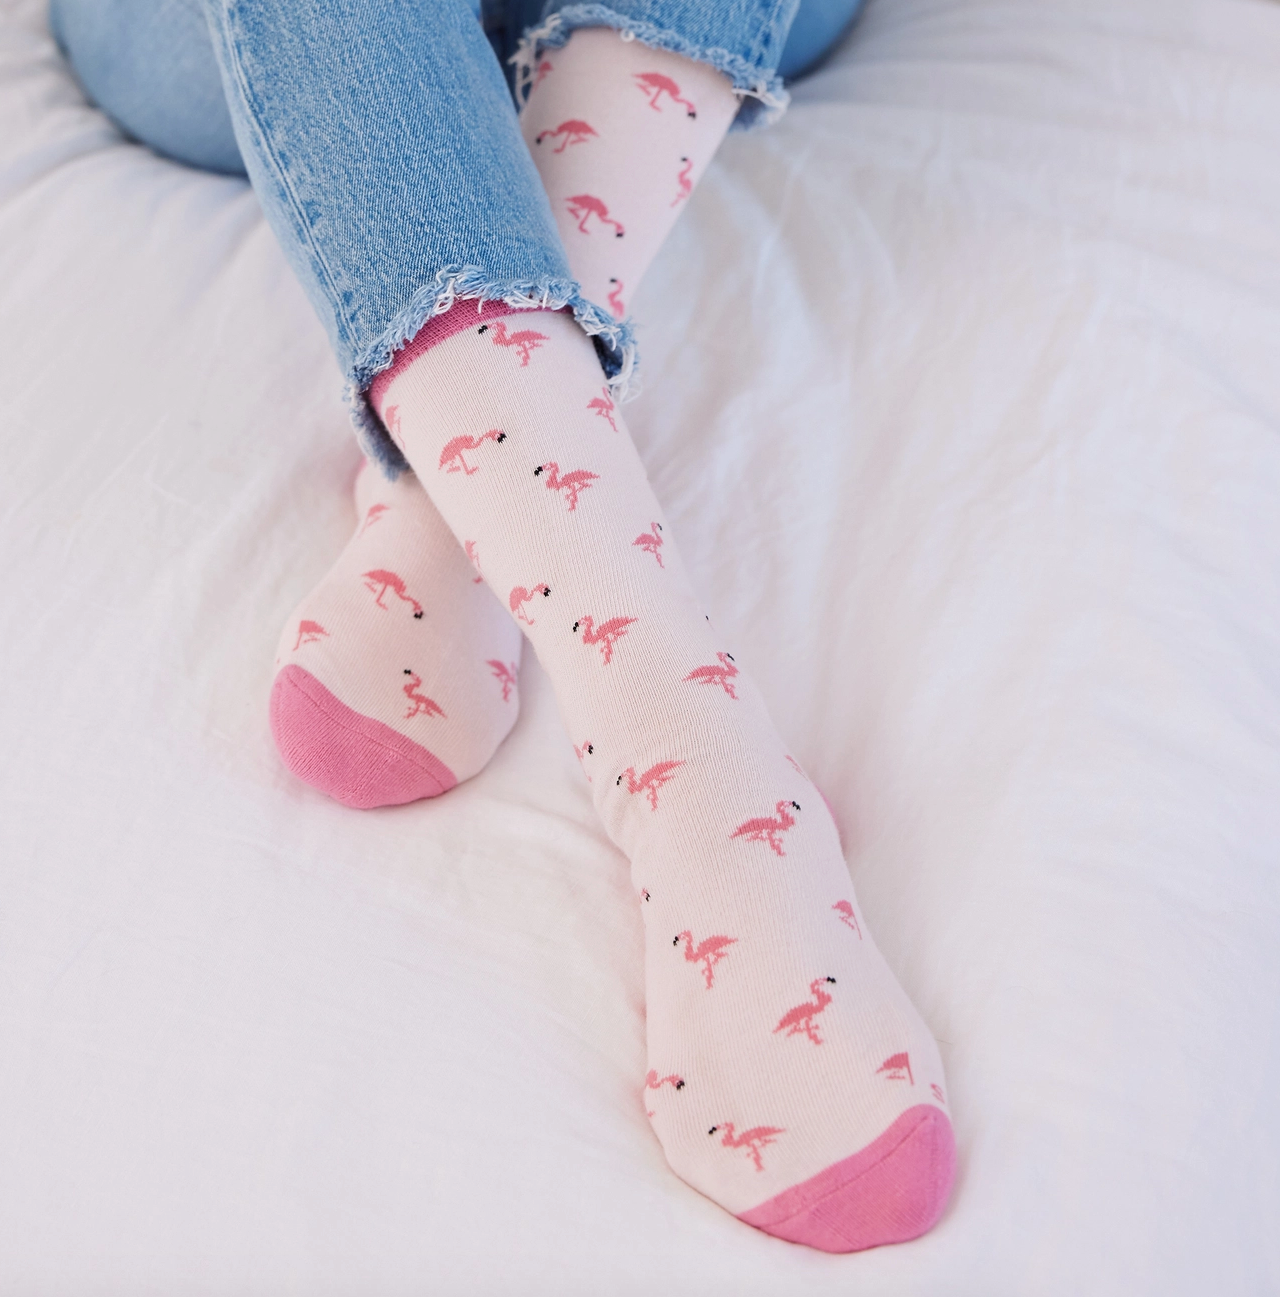 Conscious Step - Socks that Protect Flamingos  Conscious Step   -better made easy-eco-friendly-sustainable-gifting